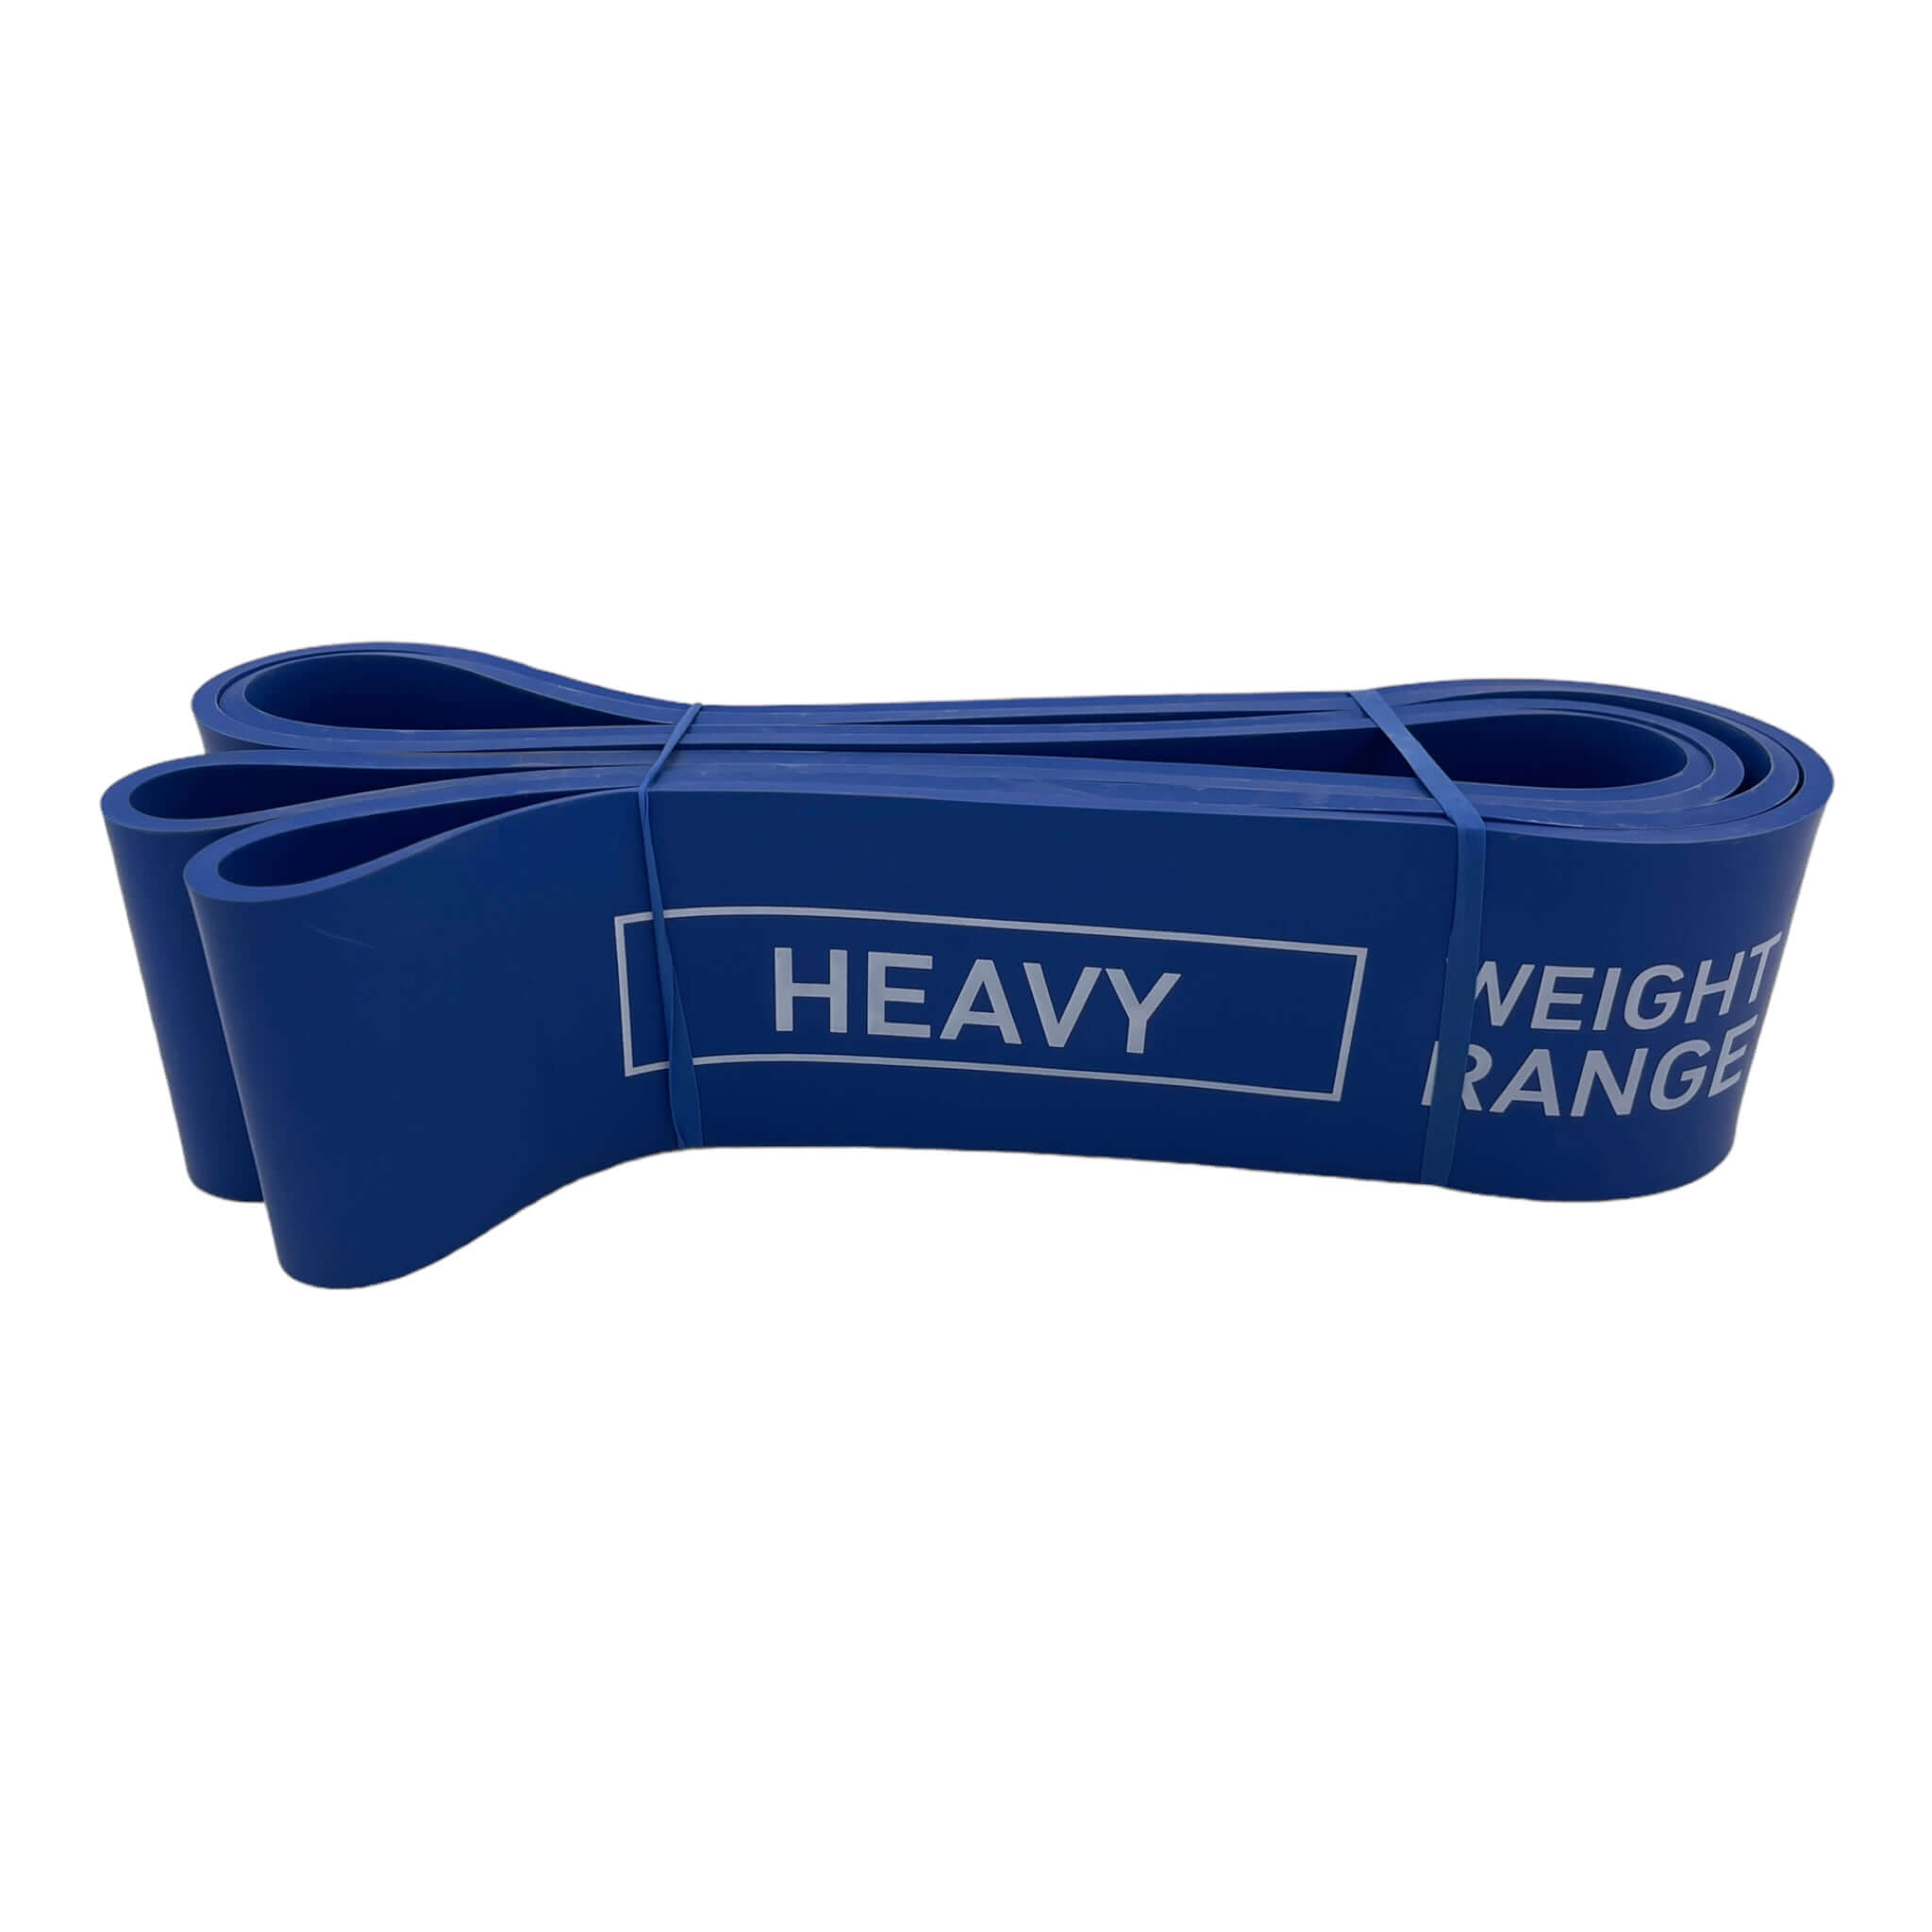 Latex Resistance Power Bands HEAVY Blue 64mm | INSOURCE